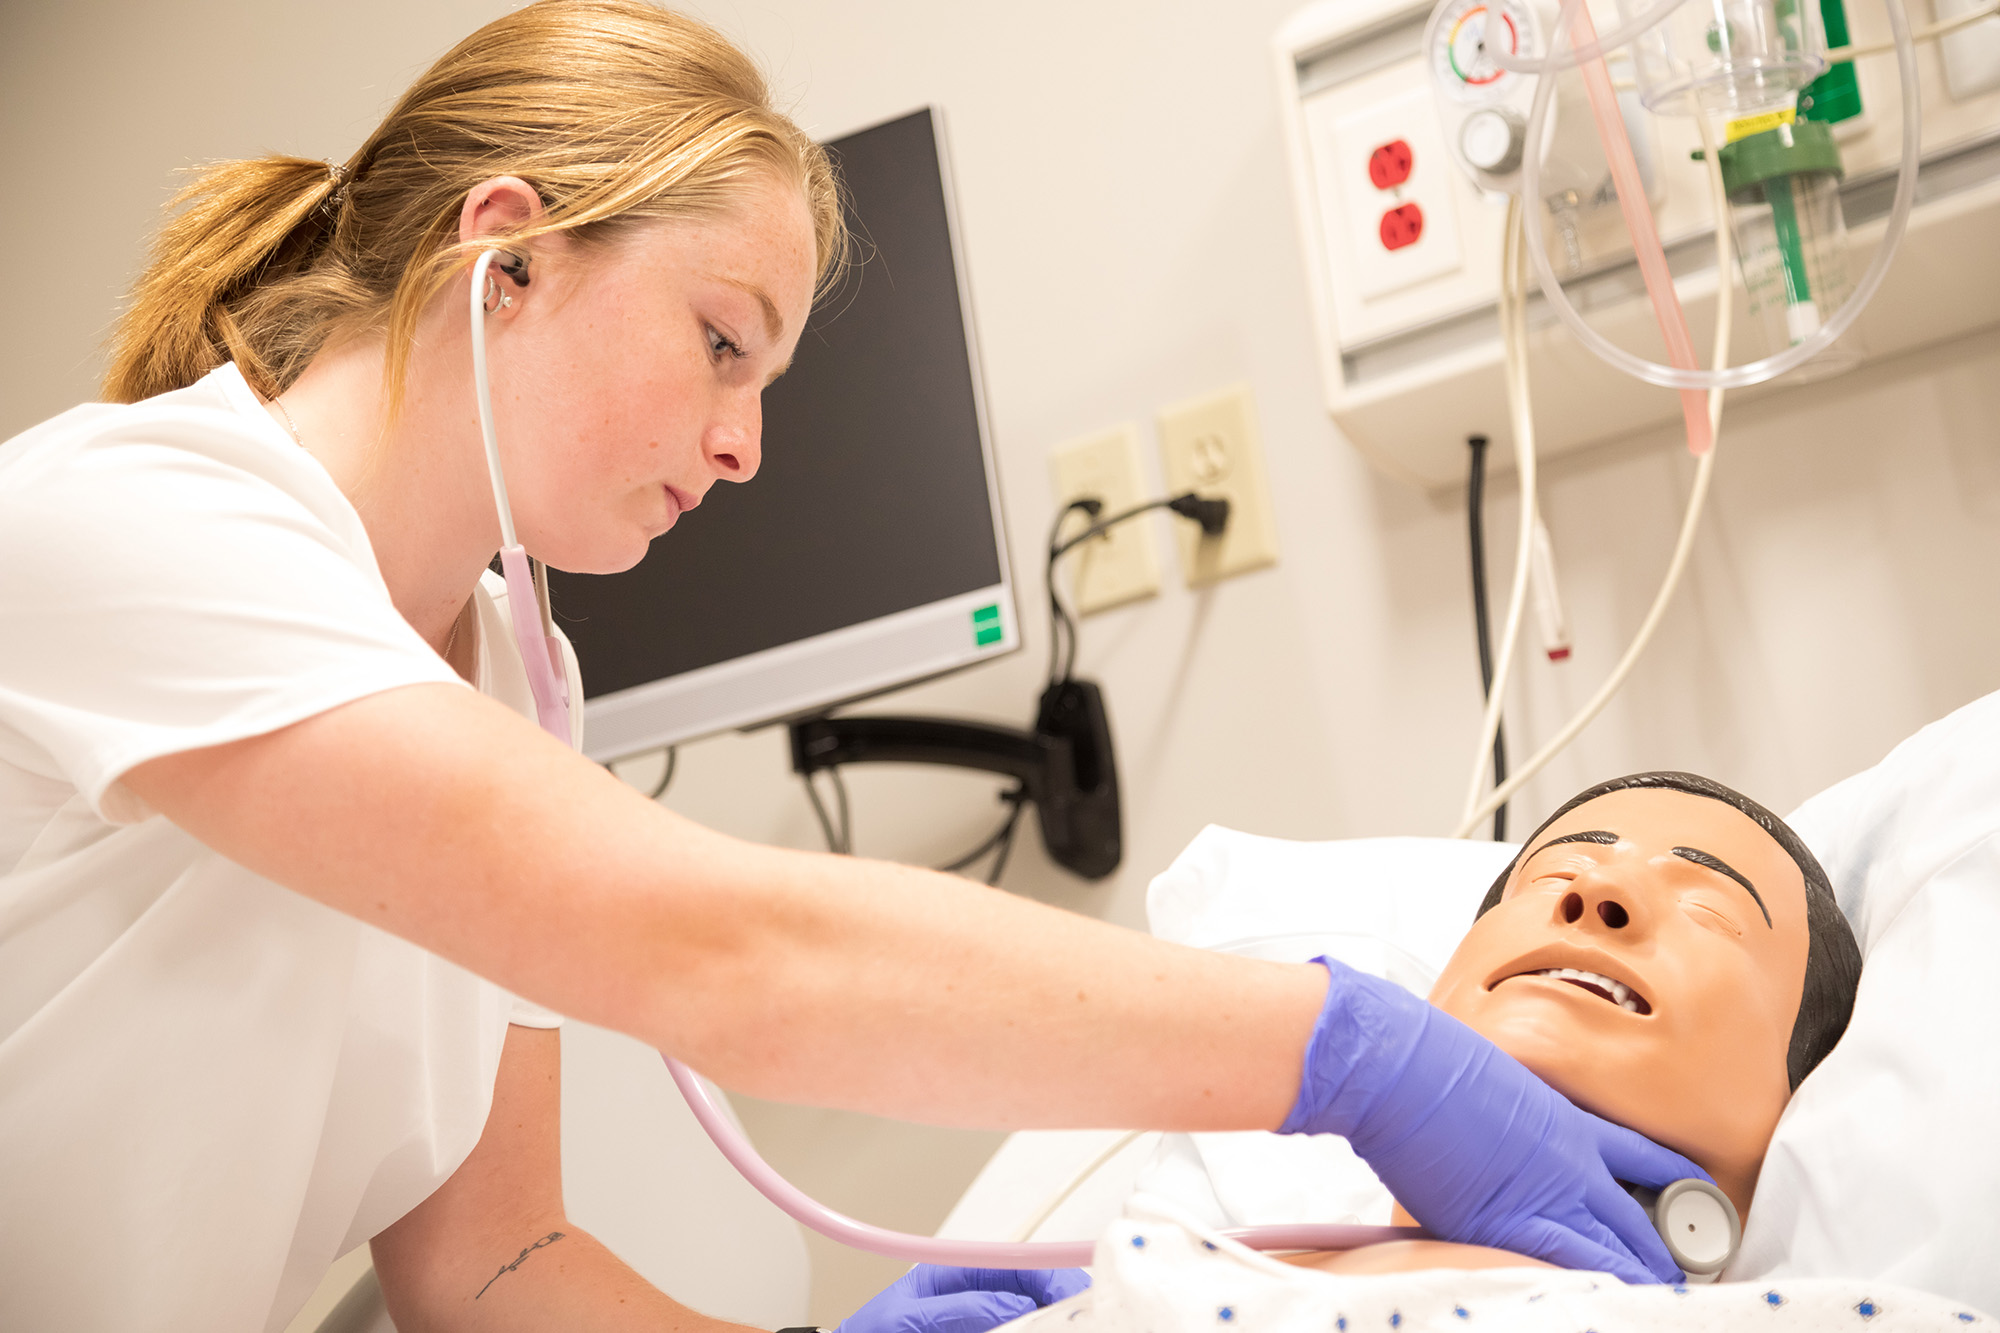 Nursing student wearing white scrubs with a pink stethoscope leaning over a learning dummy performing clinical learning.